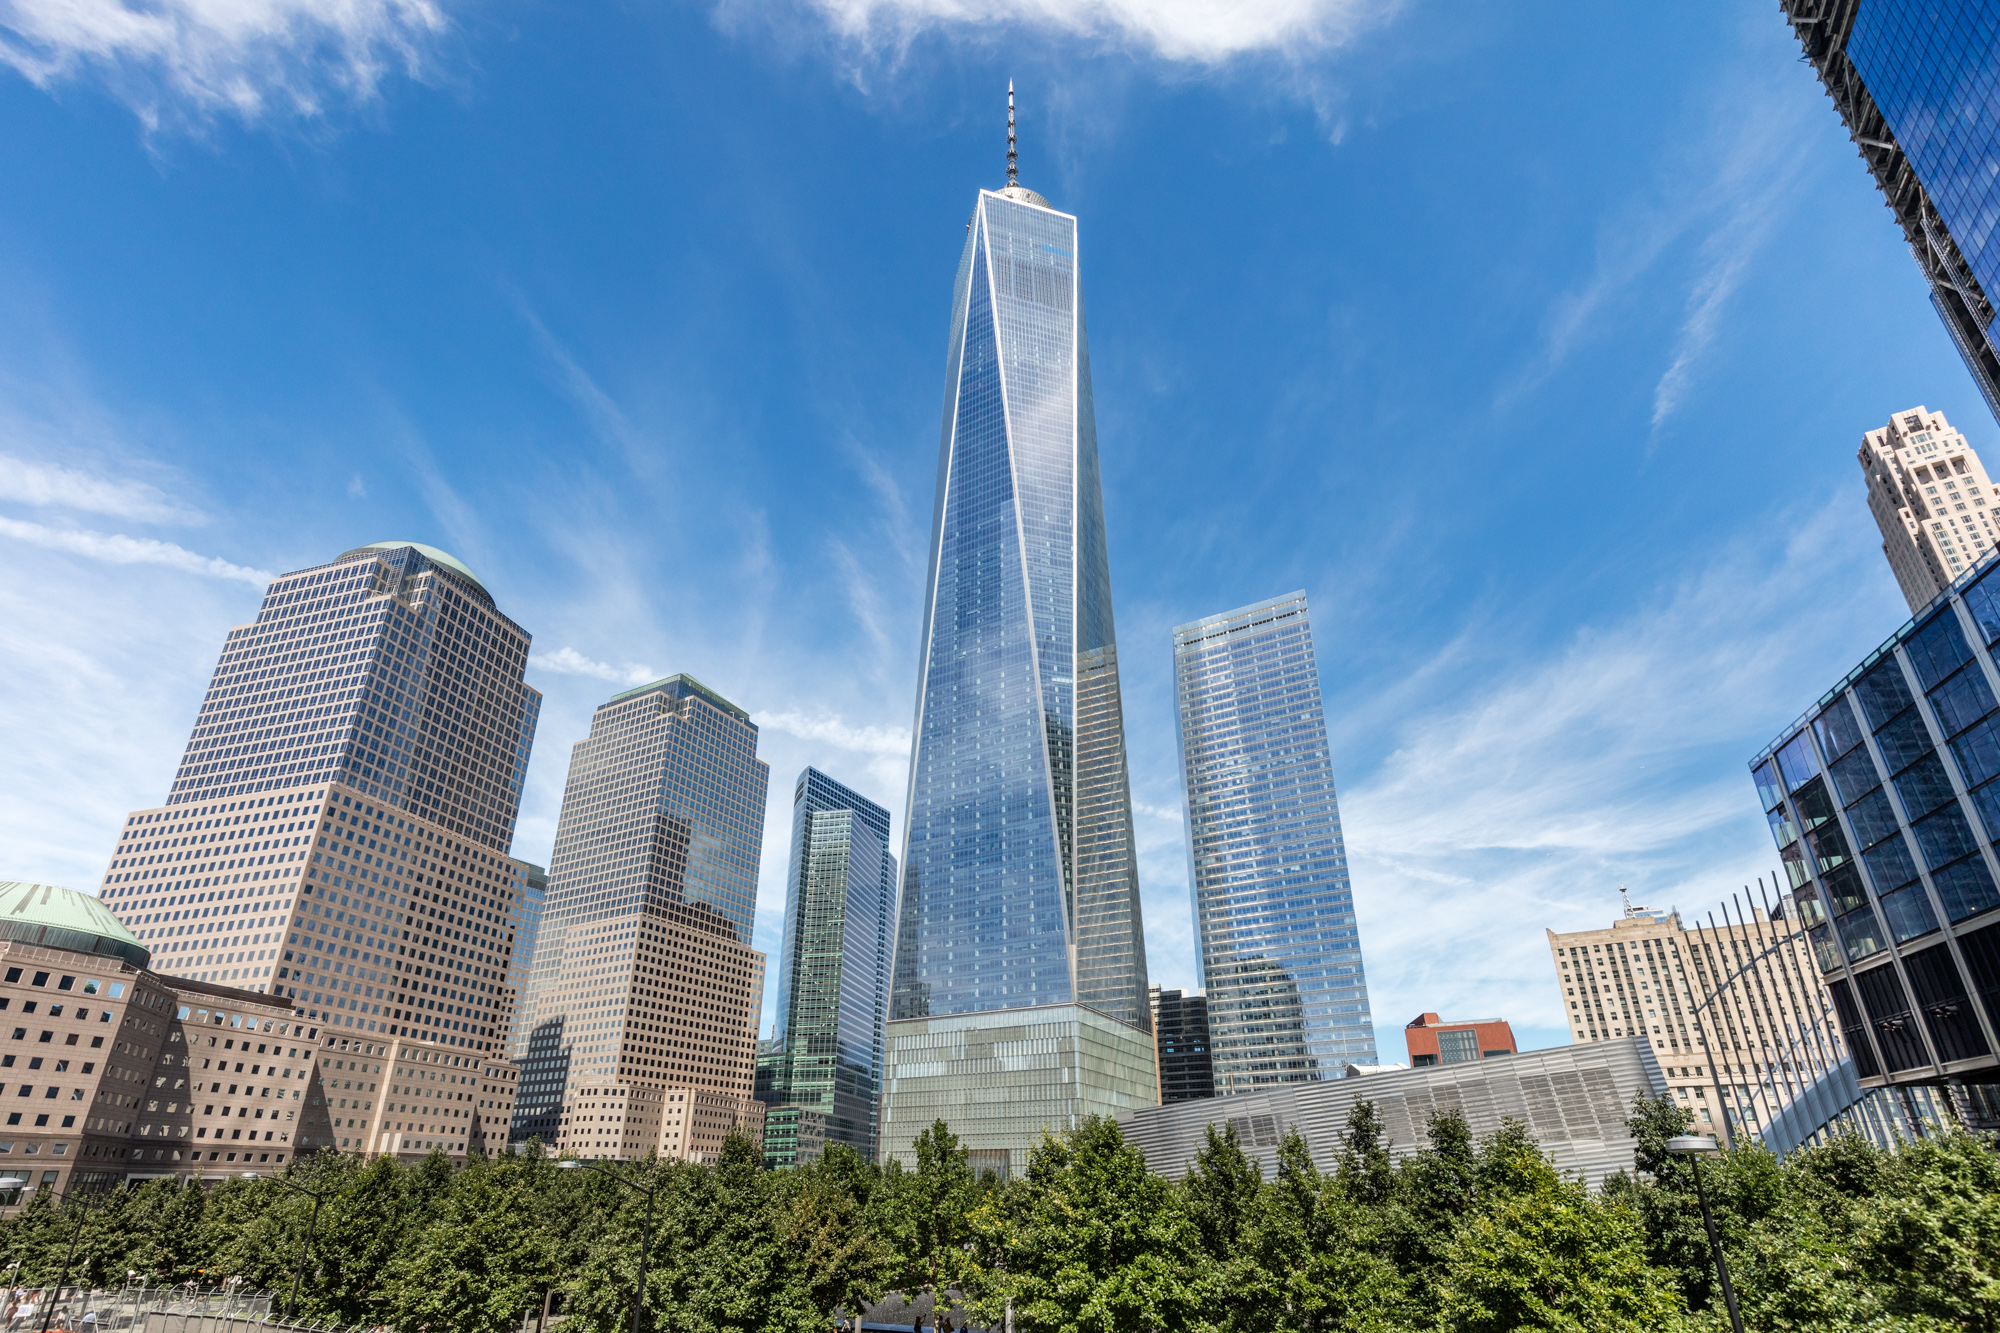 Large skyscrapers including One World Trade Center. In the foreground there is a row of trees.